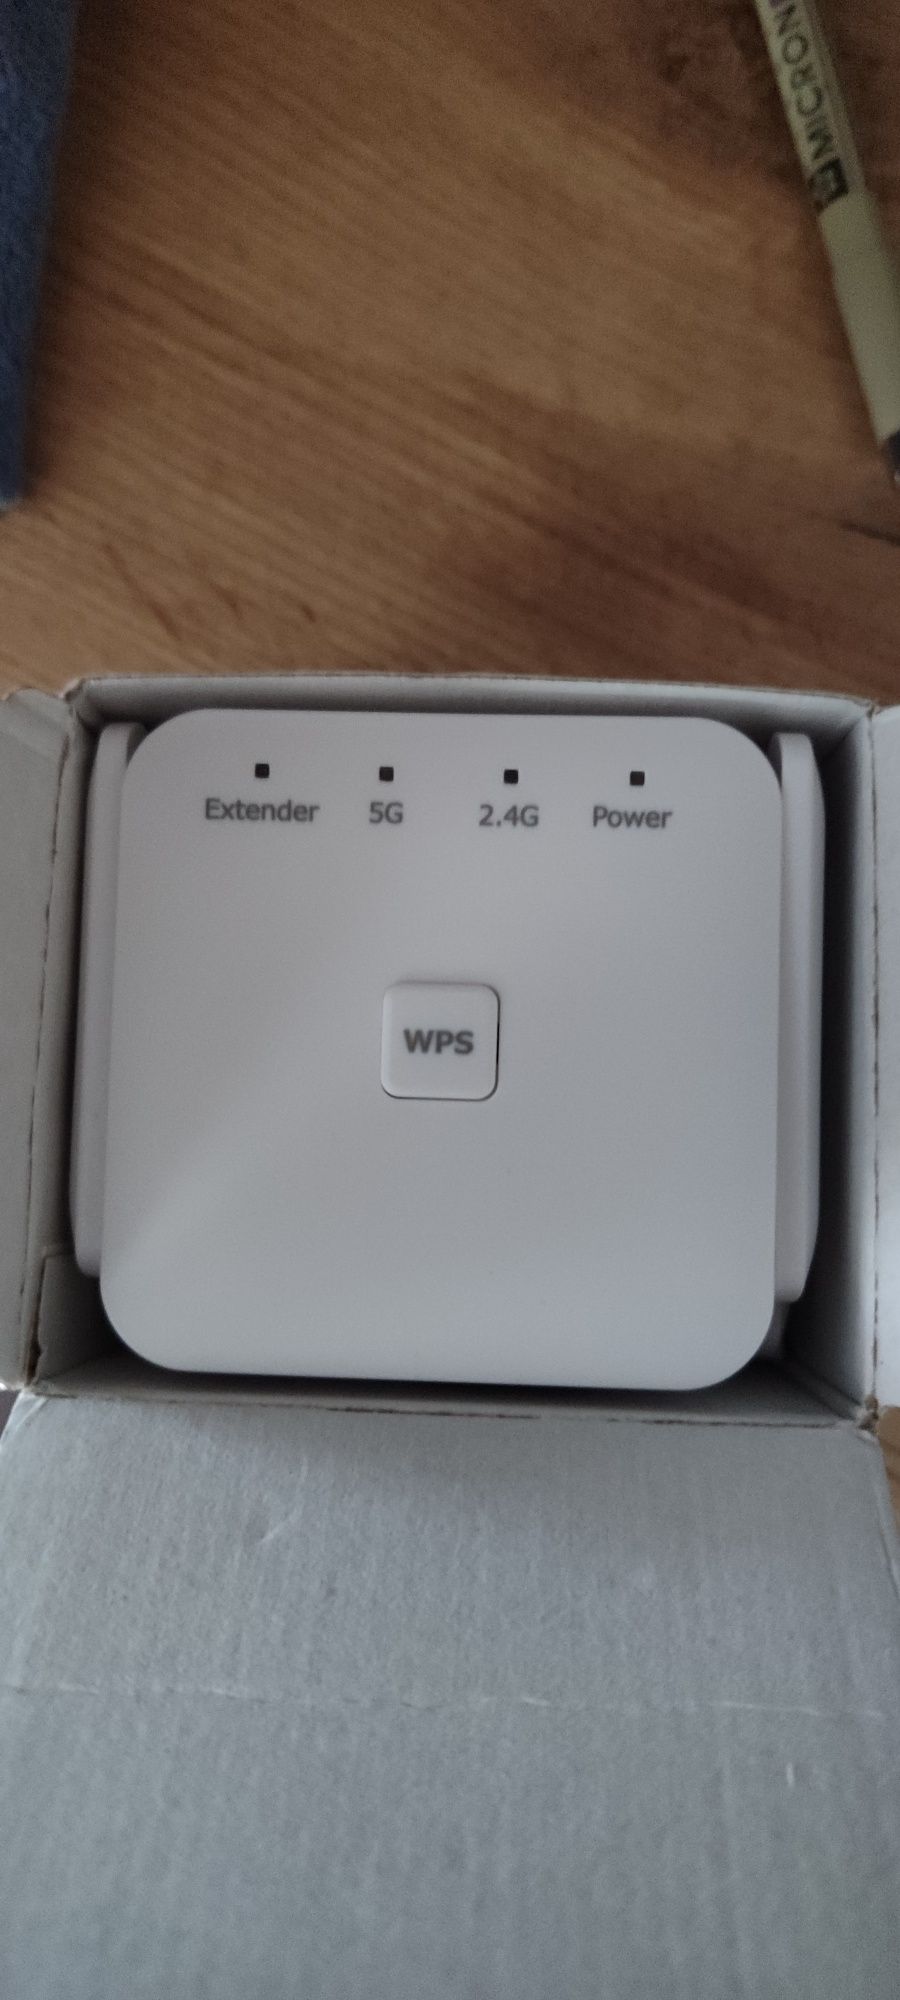 Wifi repeater extender